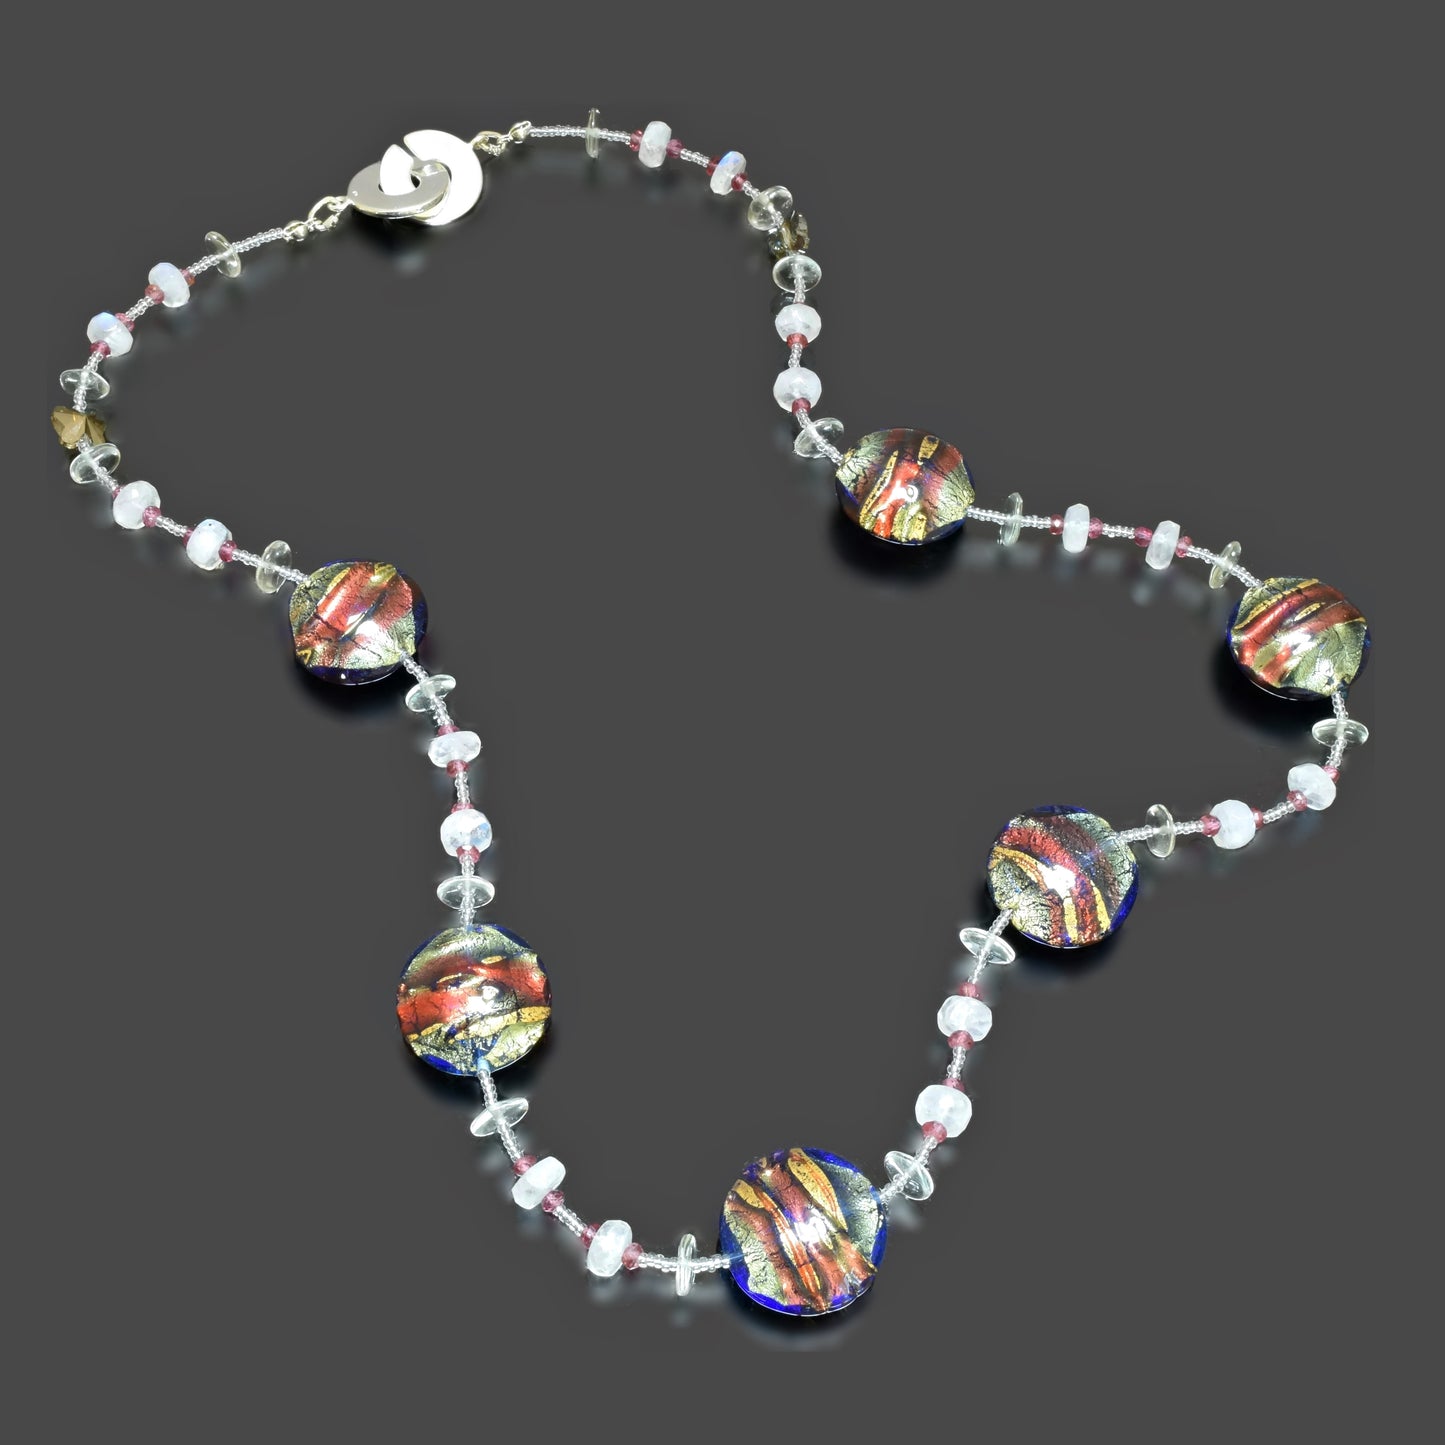 Contemporary Coin Murano Bead Necklace with Moonstone, Garnet & Green Amethyst Sterling Silver 